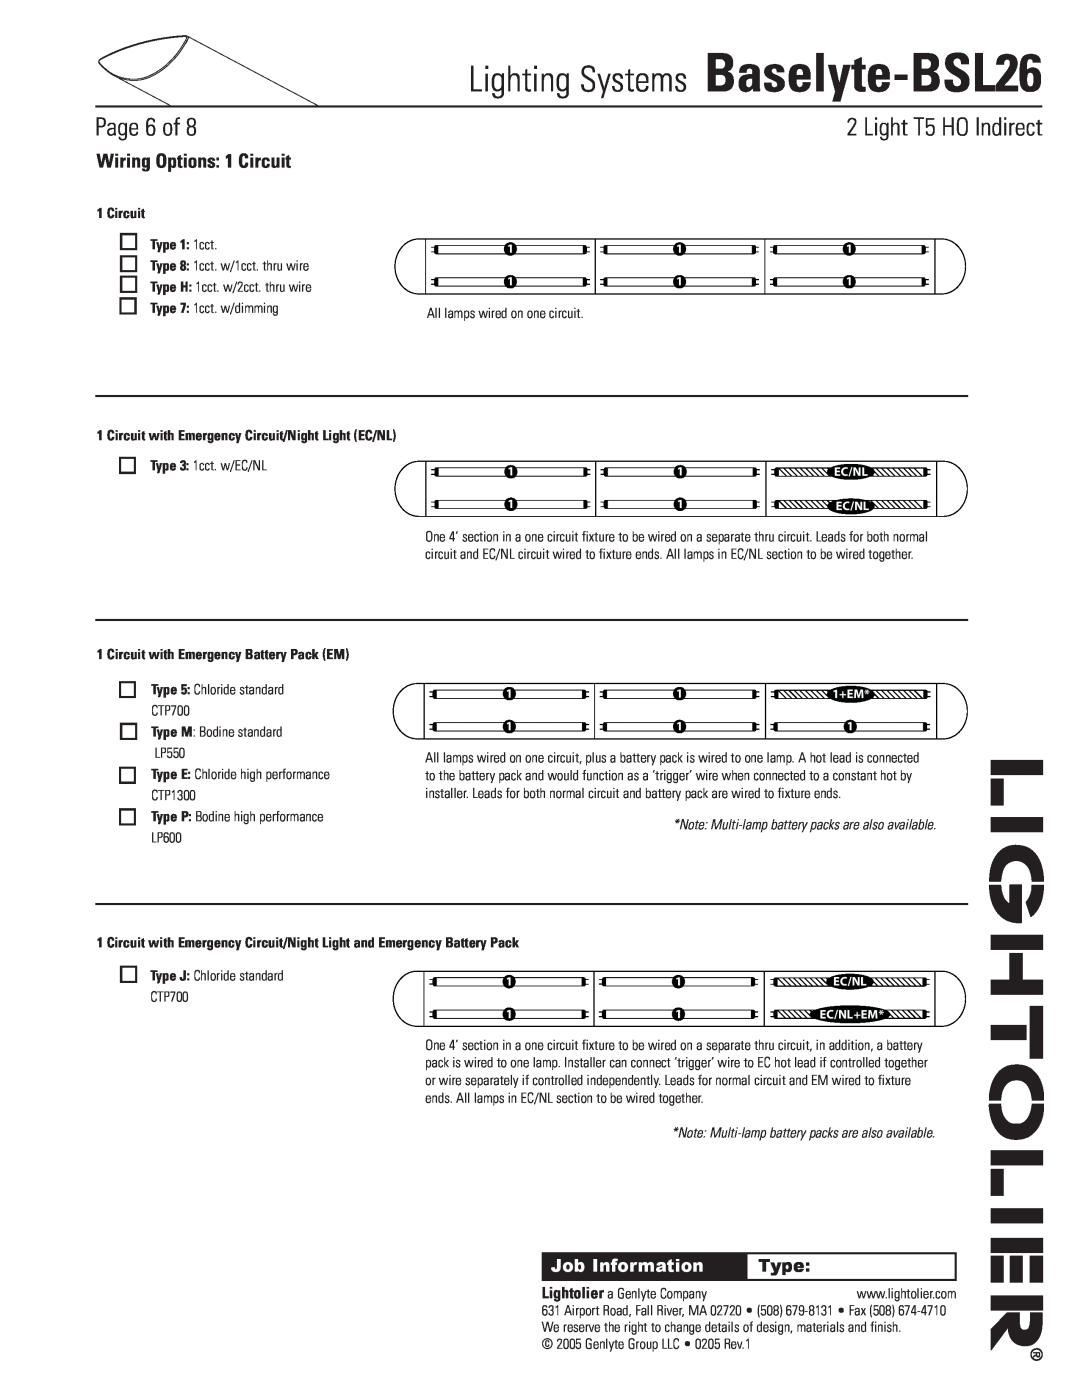 Lightolier Baselyte-BSL26 Wiring Options 1 Circuit, Circuit Type 1 1cct, Circuit with Emergency Battery Pack EM, Page of 